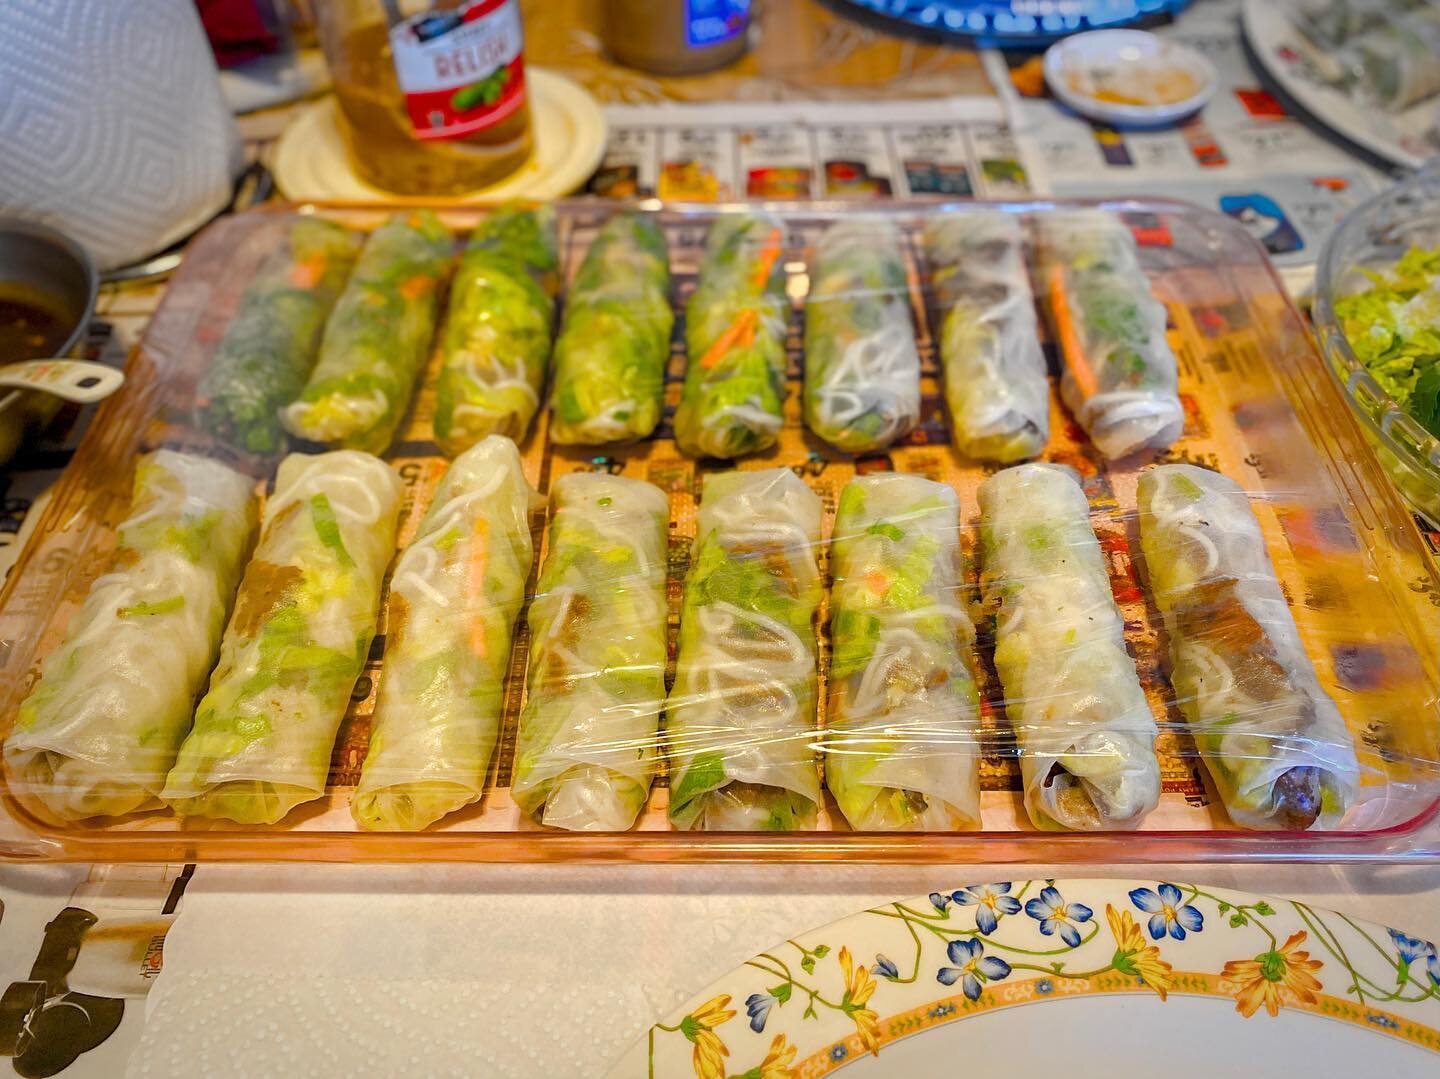 Love making fresh and healthy spring rolls before the long holiday weekend! 🥬🥒🥕

#SpringRolls